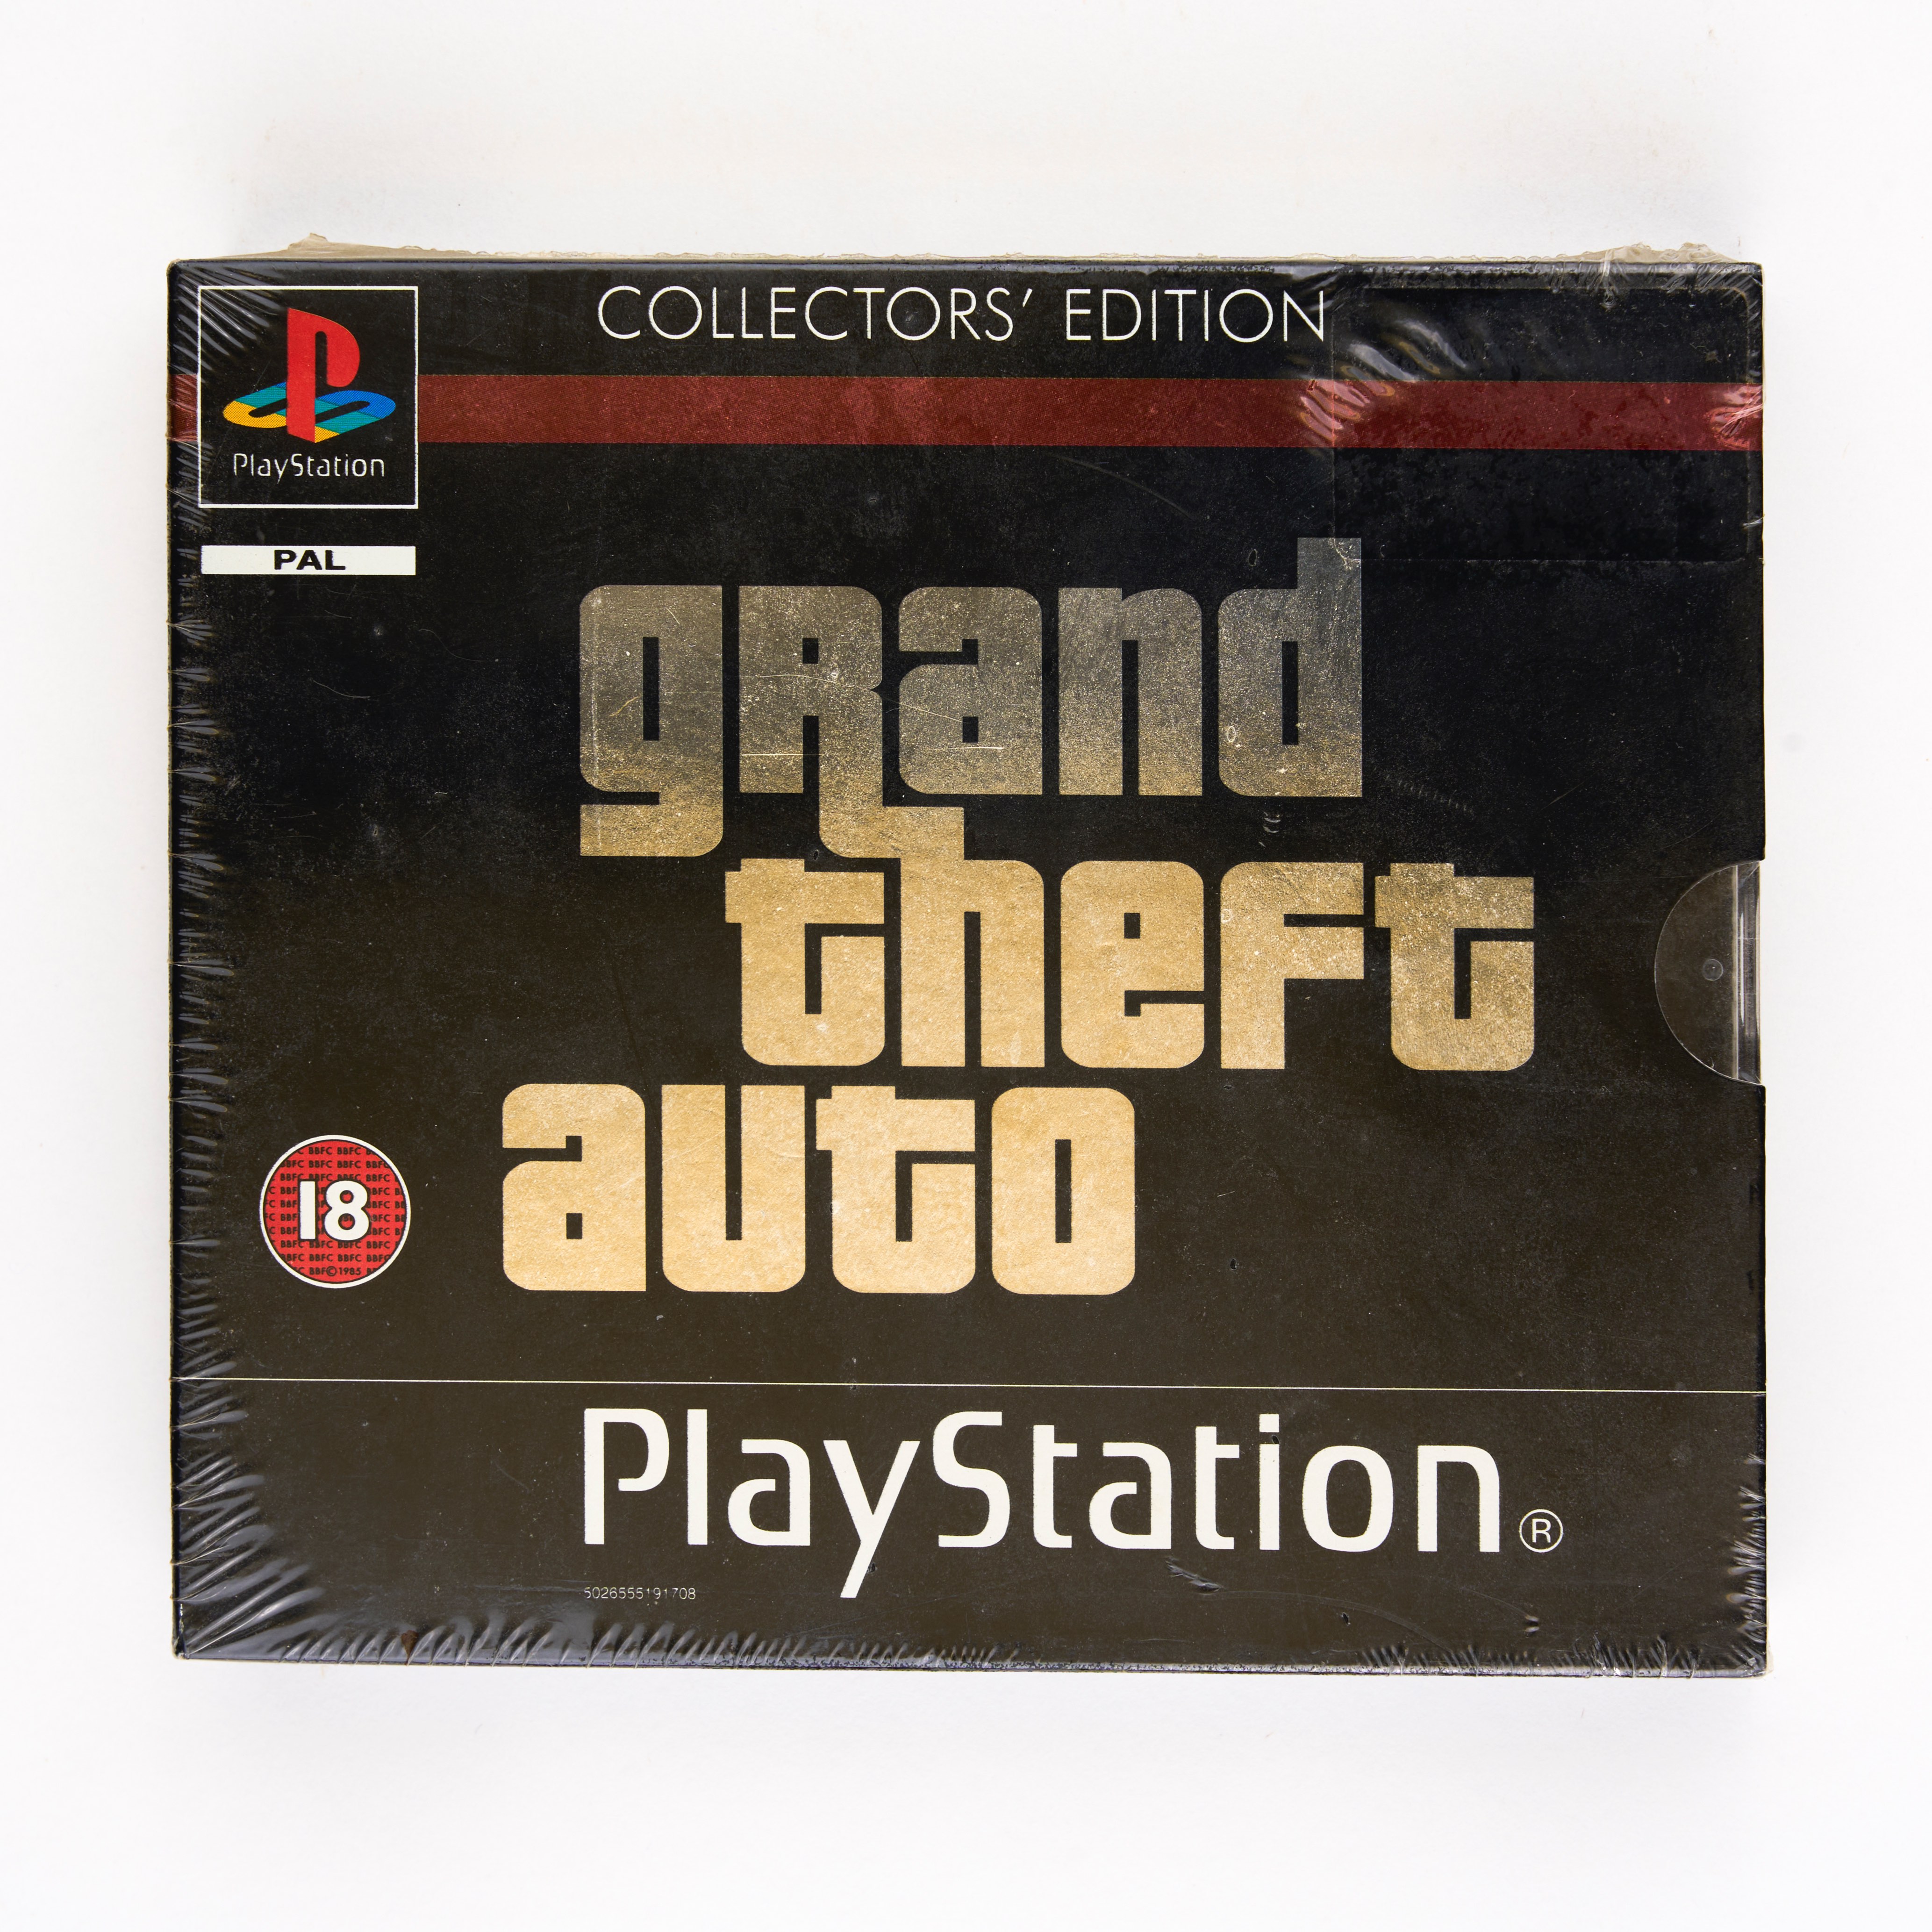 Sony - Grand Theft Auto Collectors' Edition PAL - Playstation - Sealed